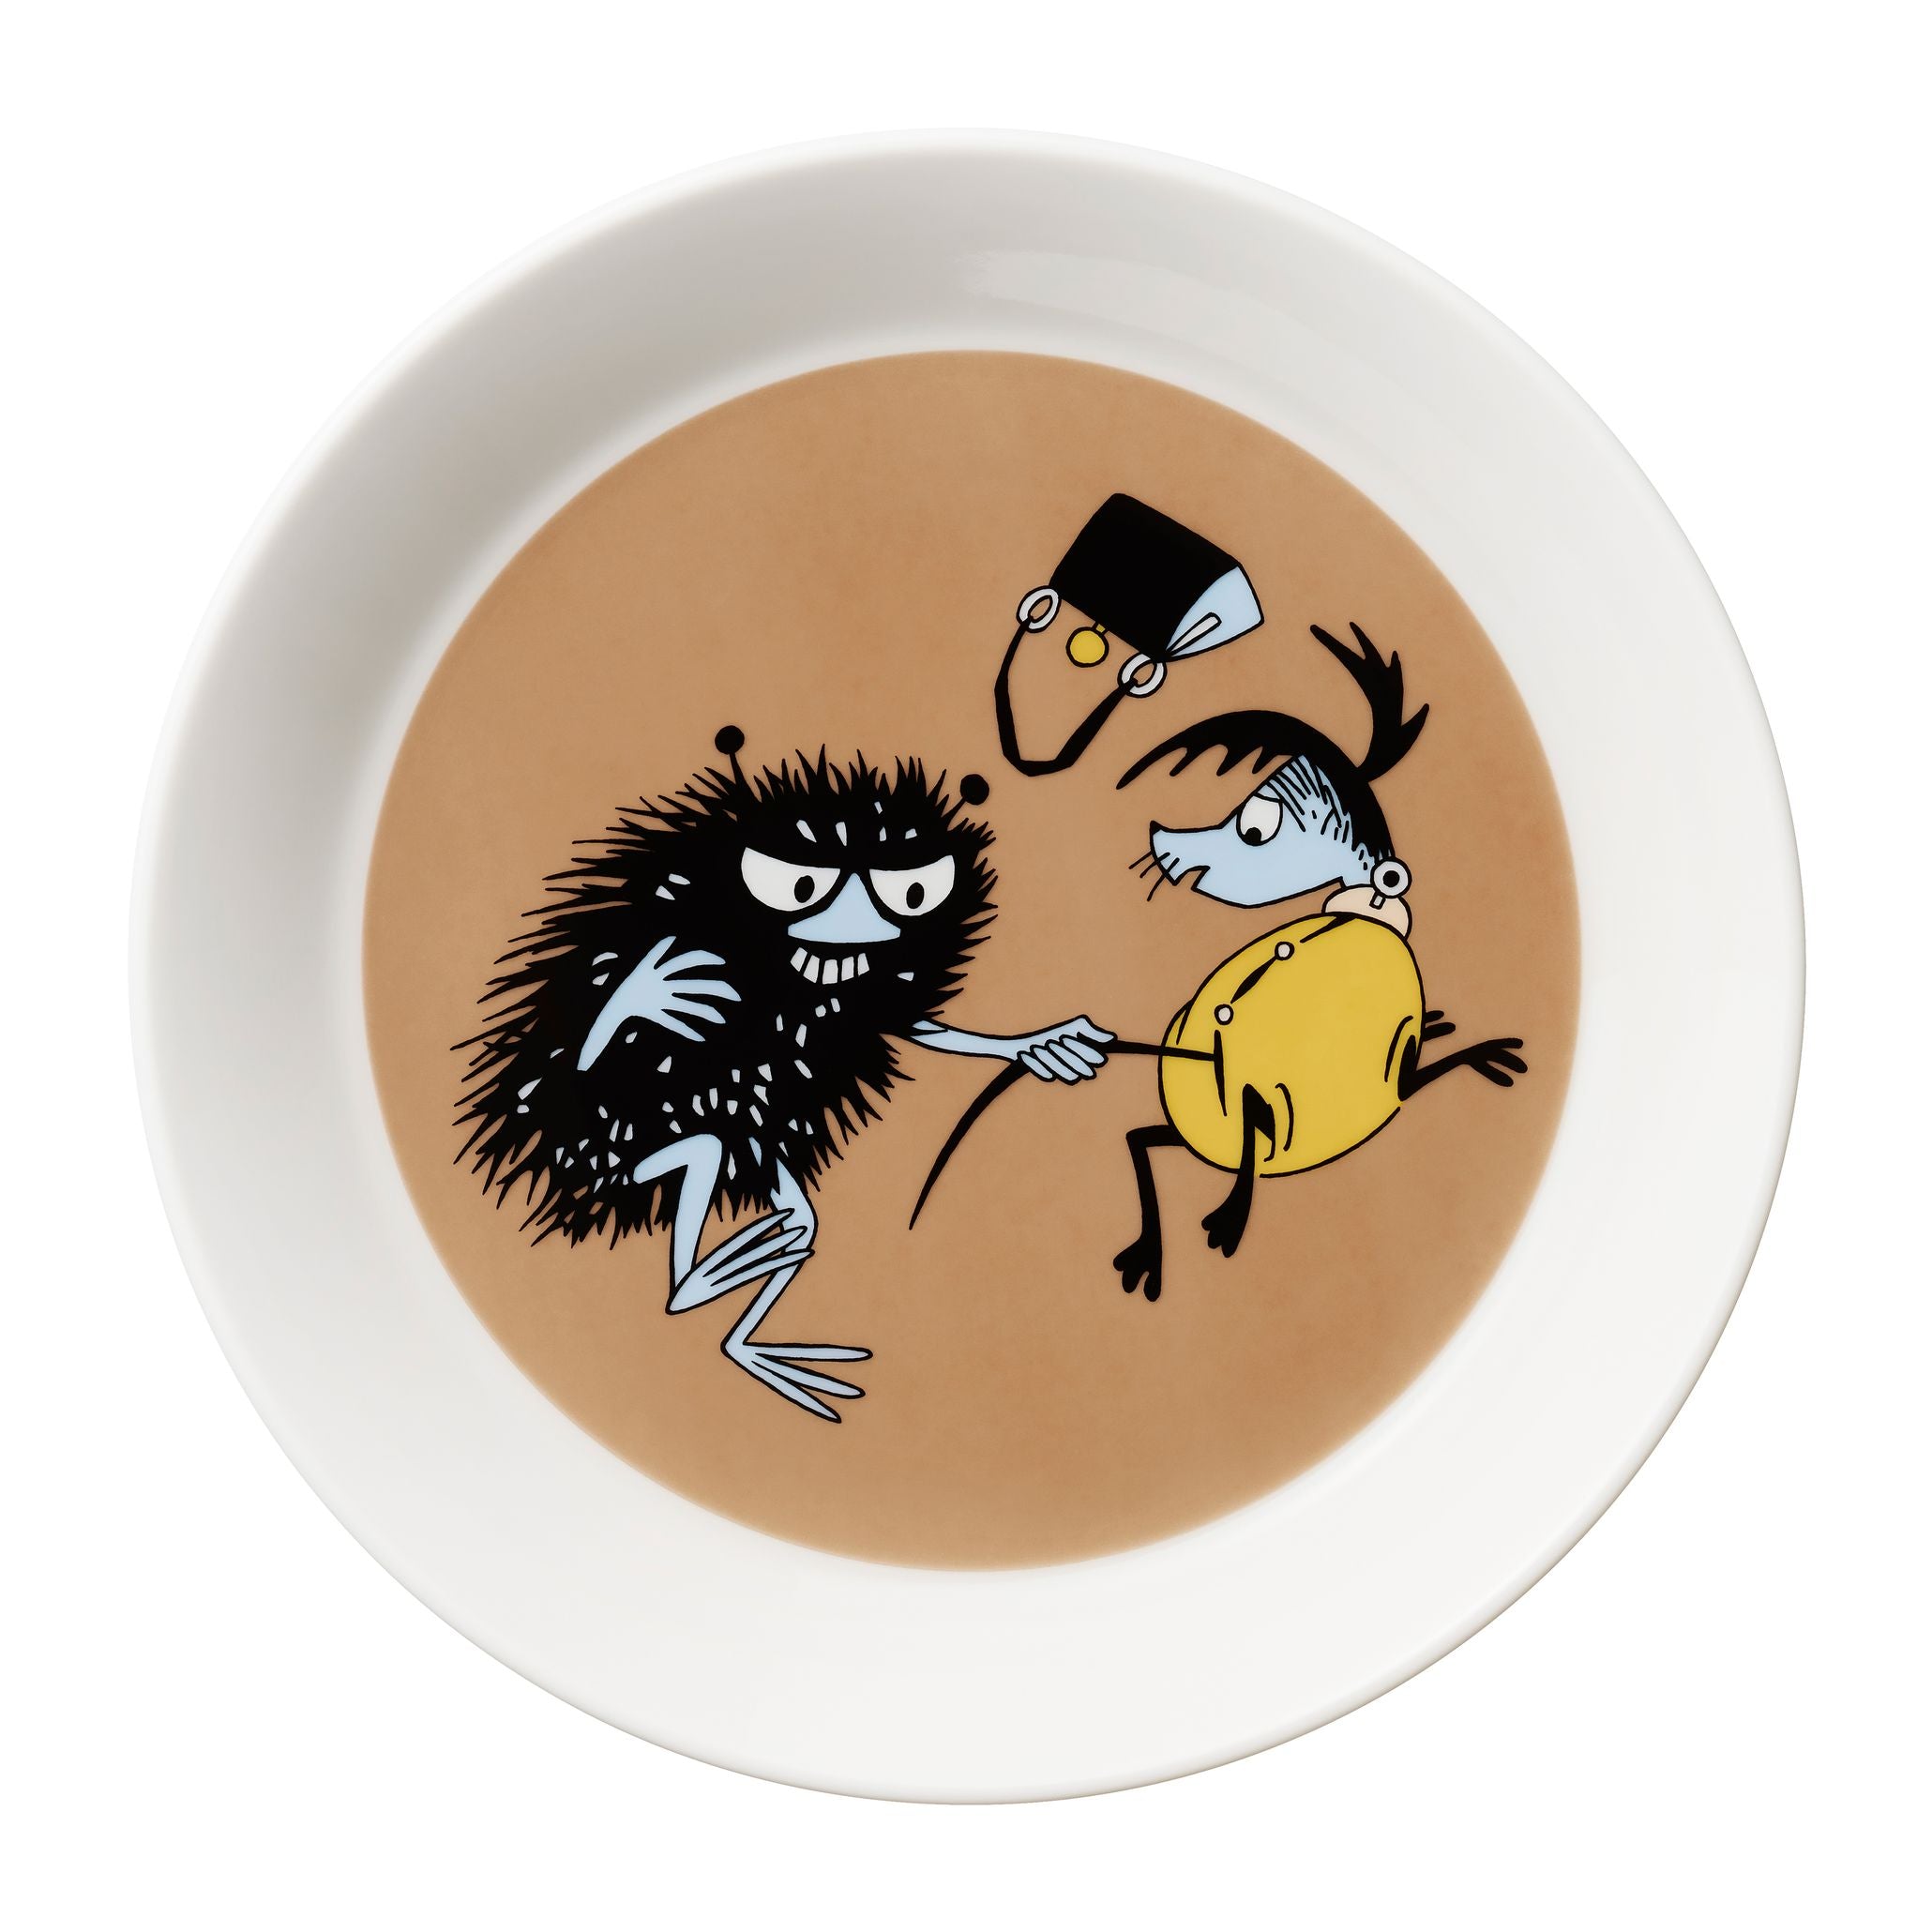 MOOMIN CLASSICS  Plate 19cm  / 7.5"  2022 Stinky in action